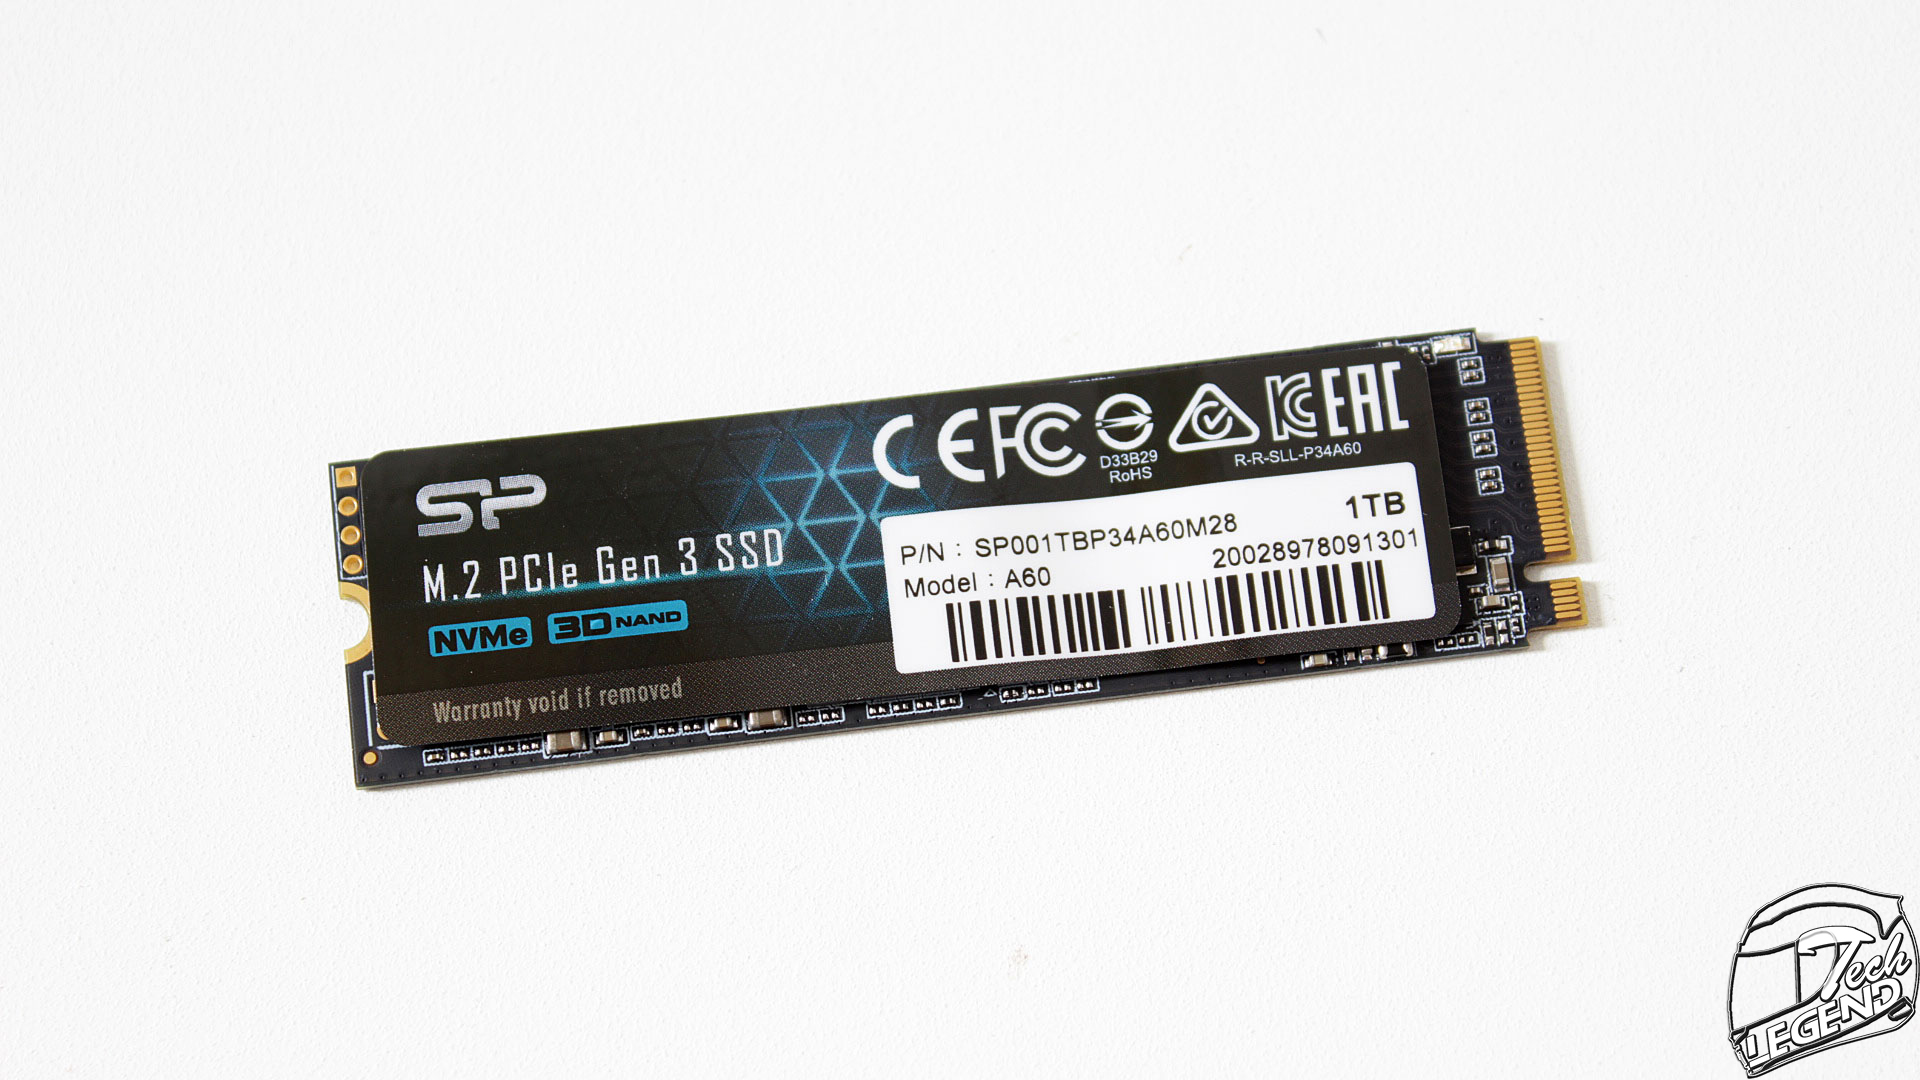 Installing the 512GB Silicon Power SSD 